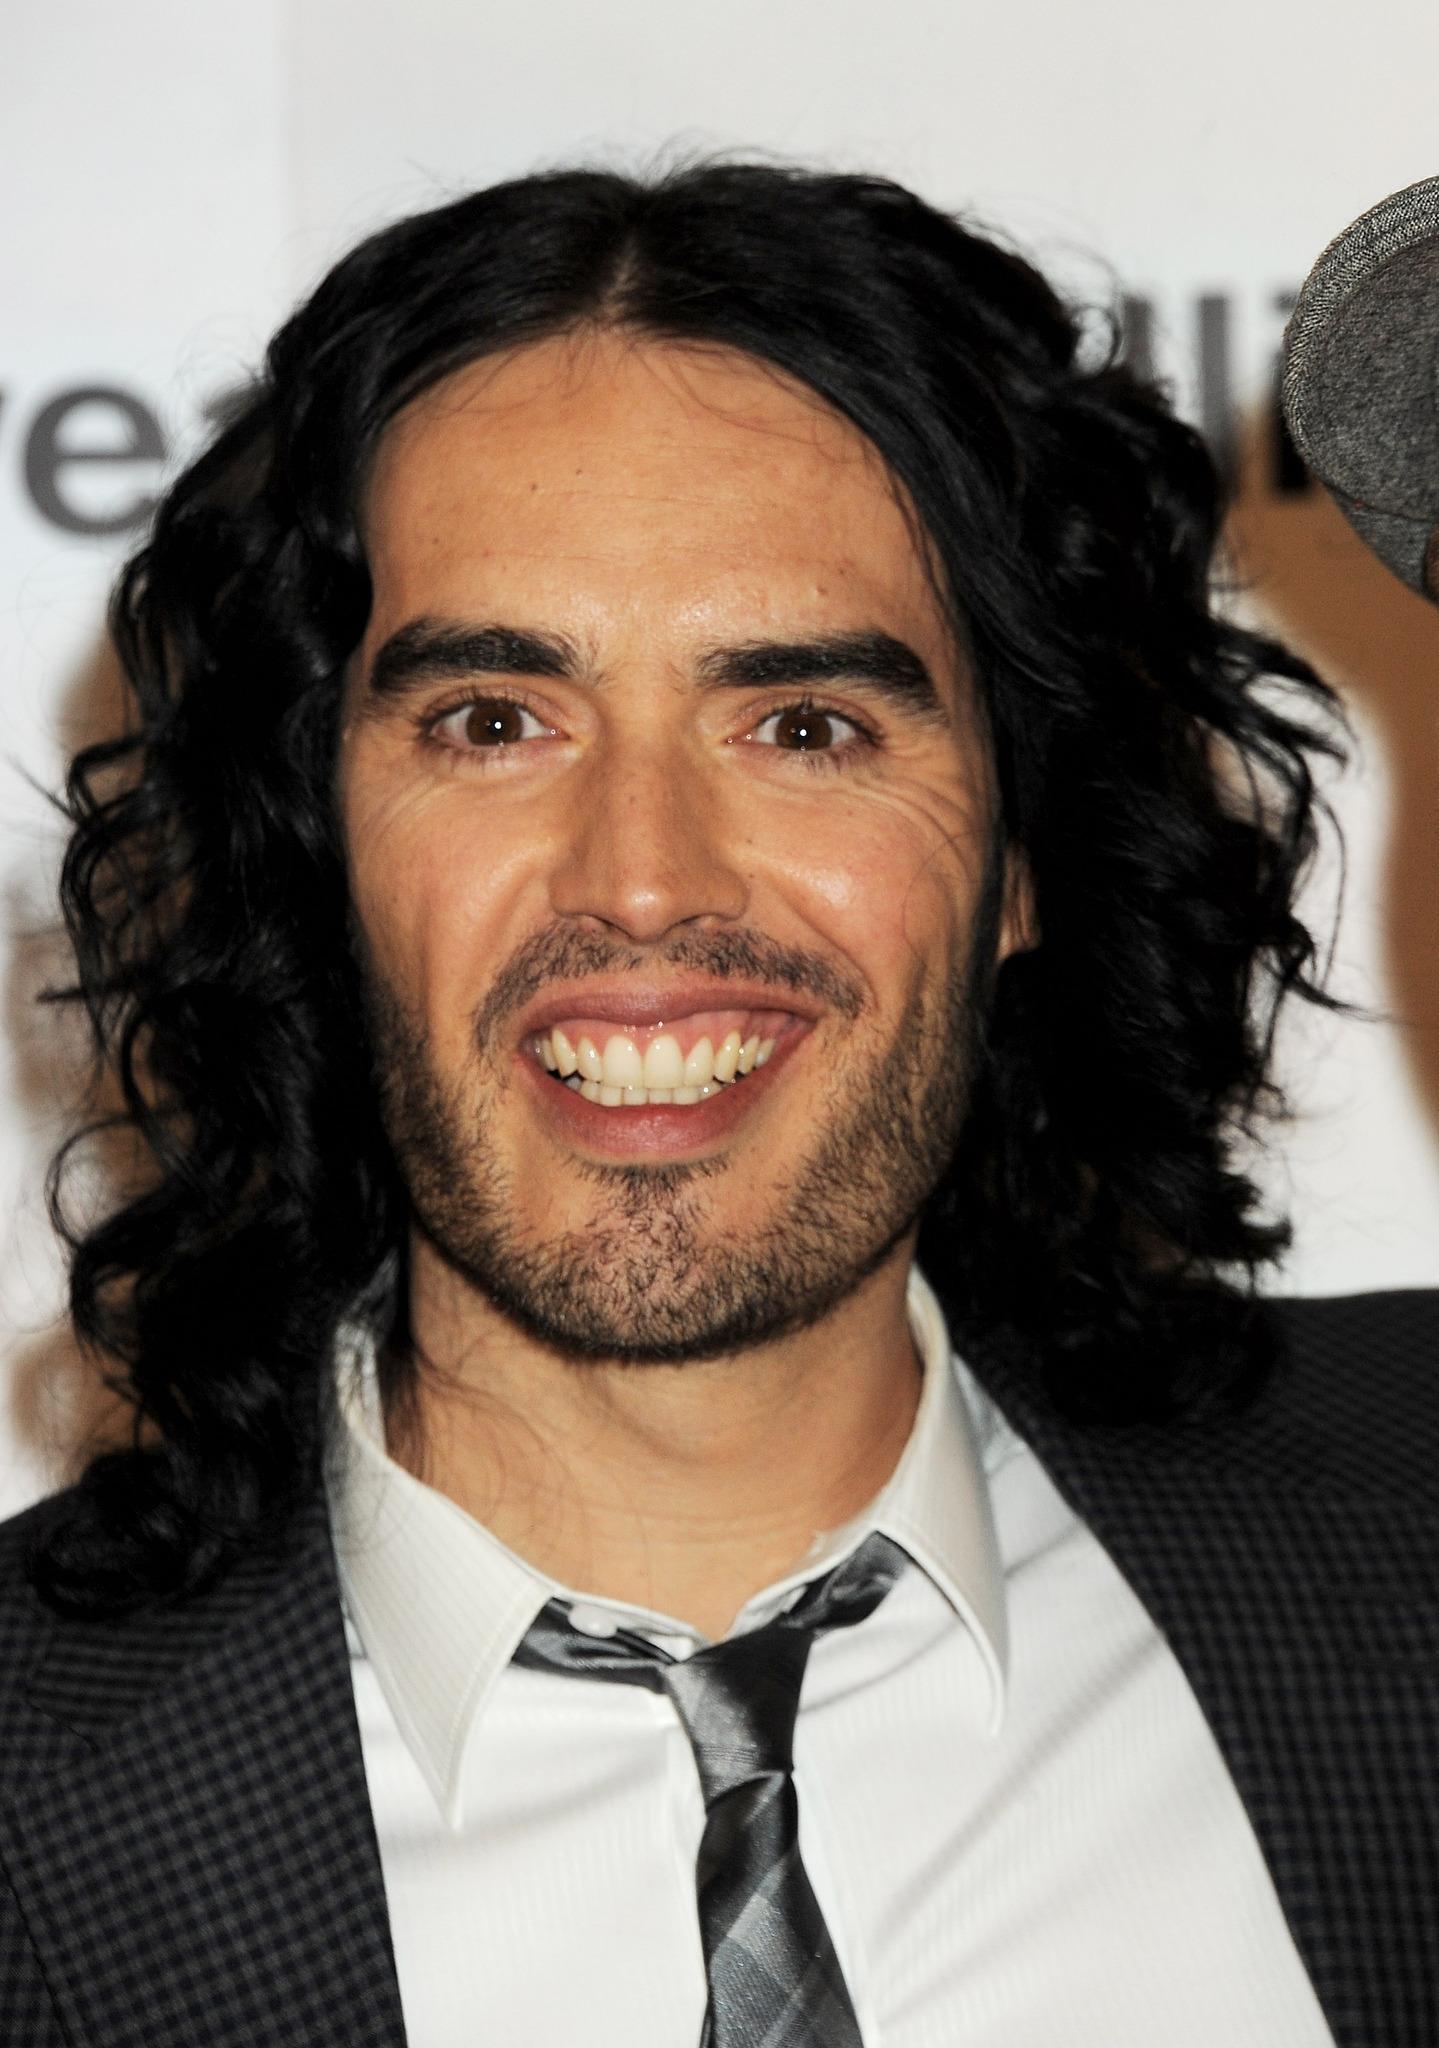 Russell Brand image